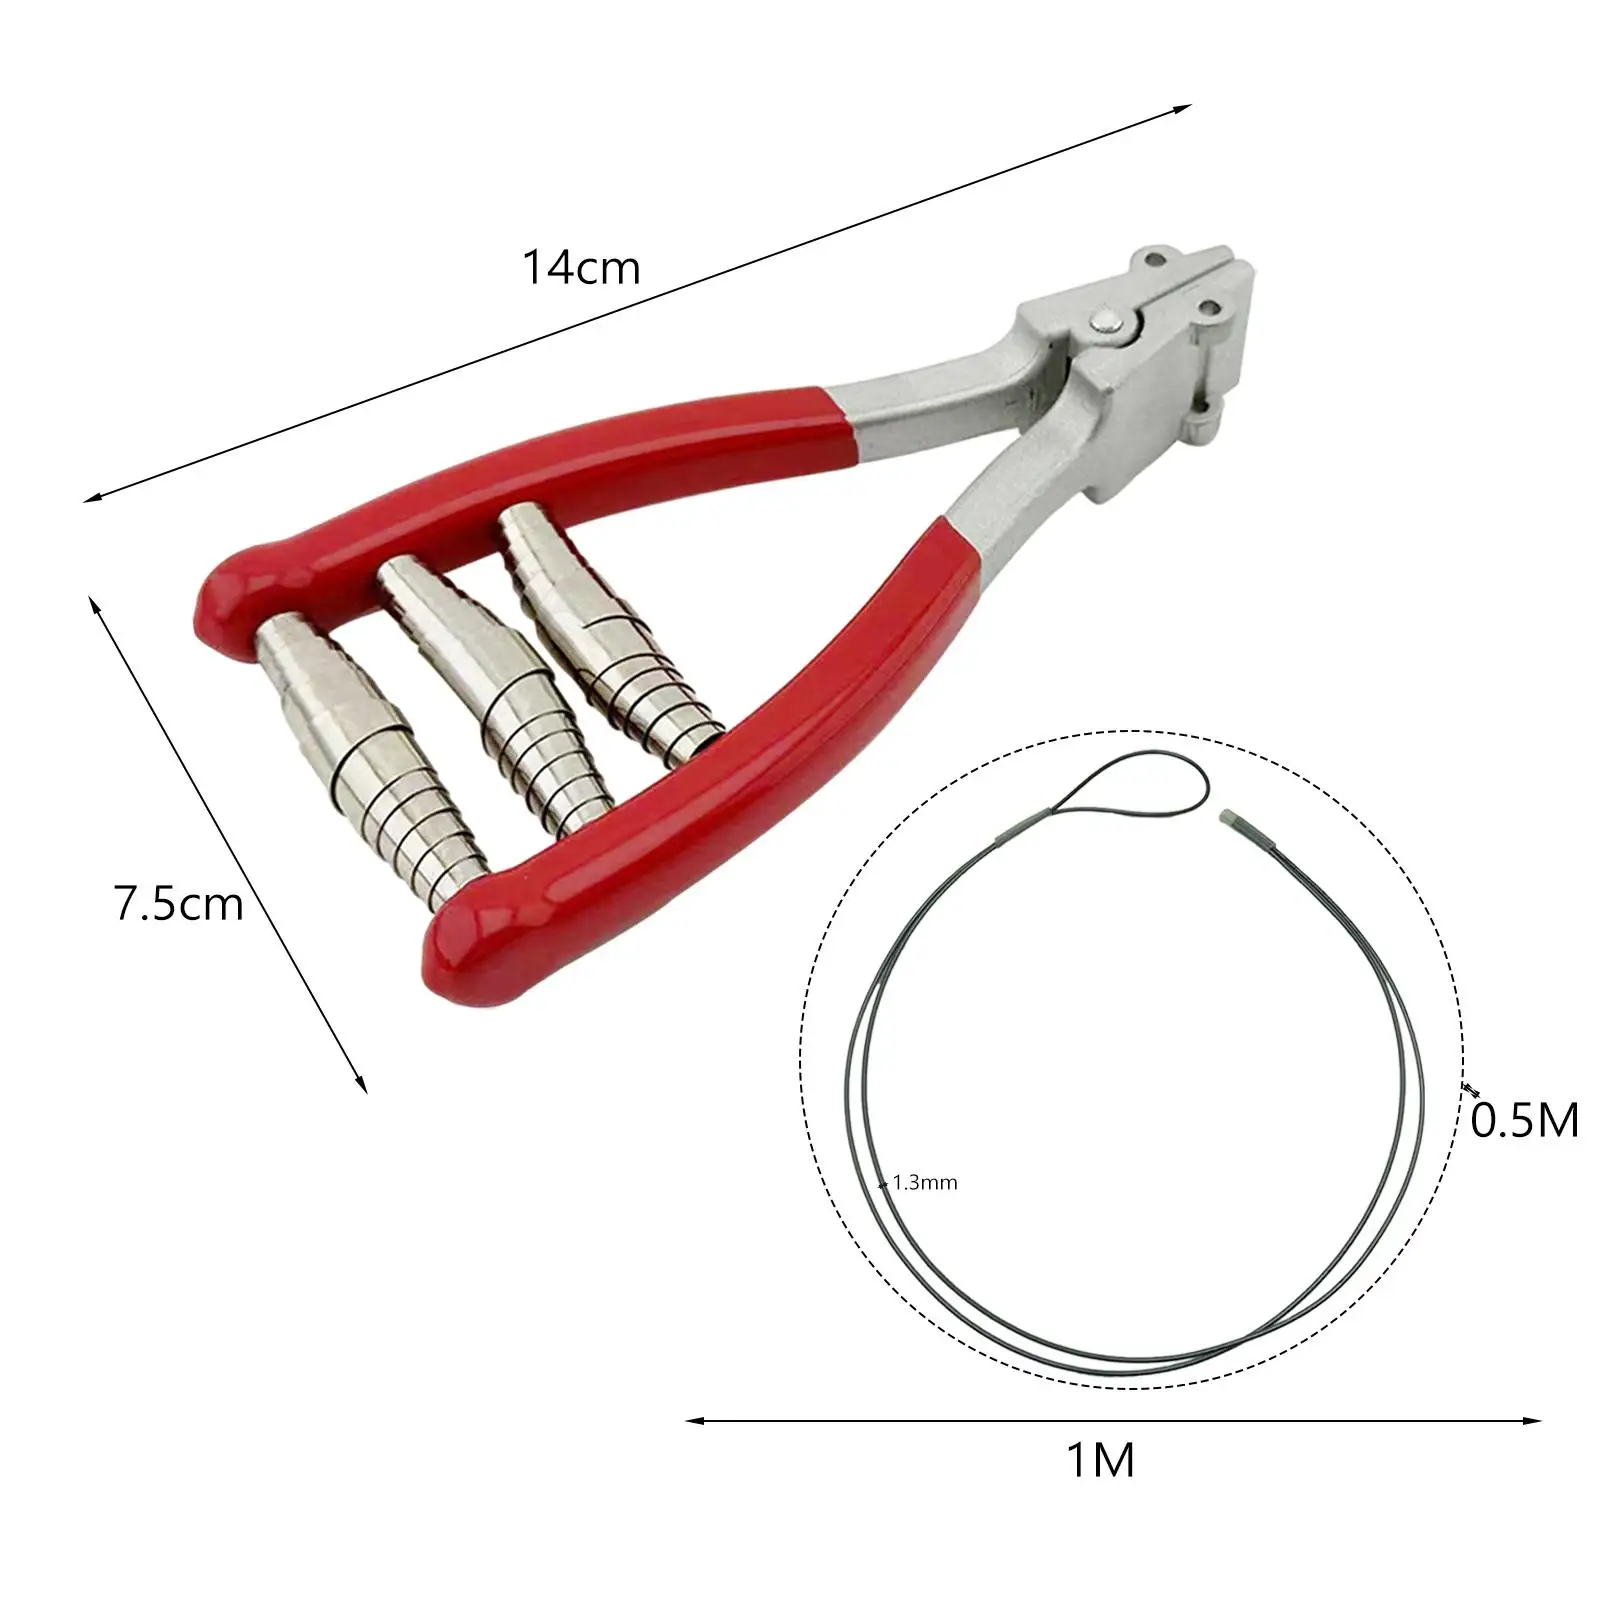 String Starting Clamp Stringing Clamp Professional for Squash Tennis Racquet